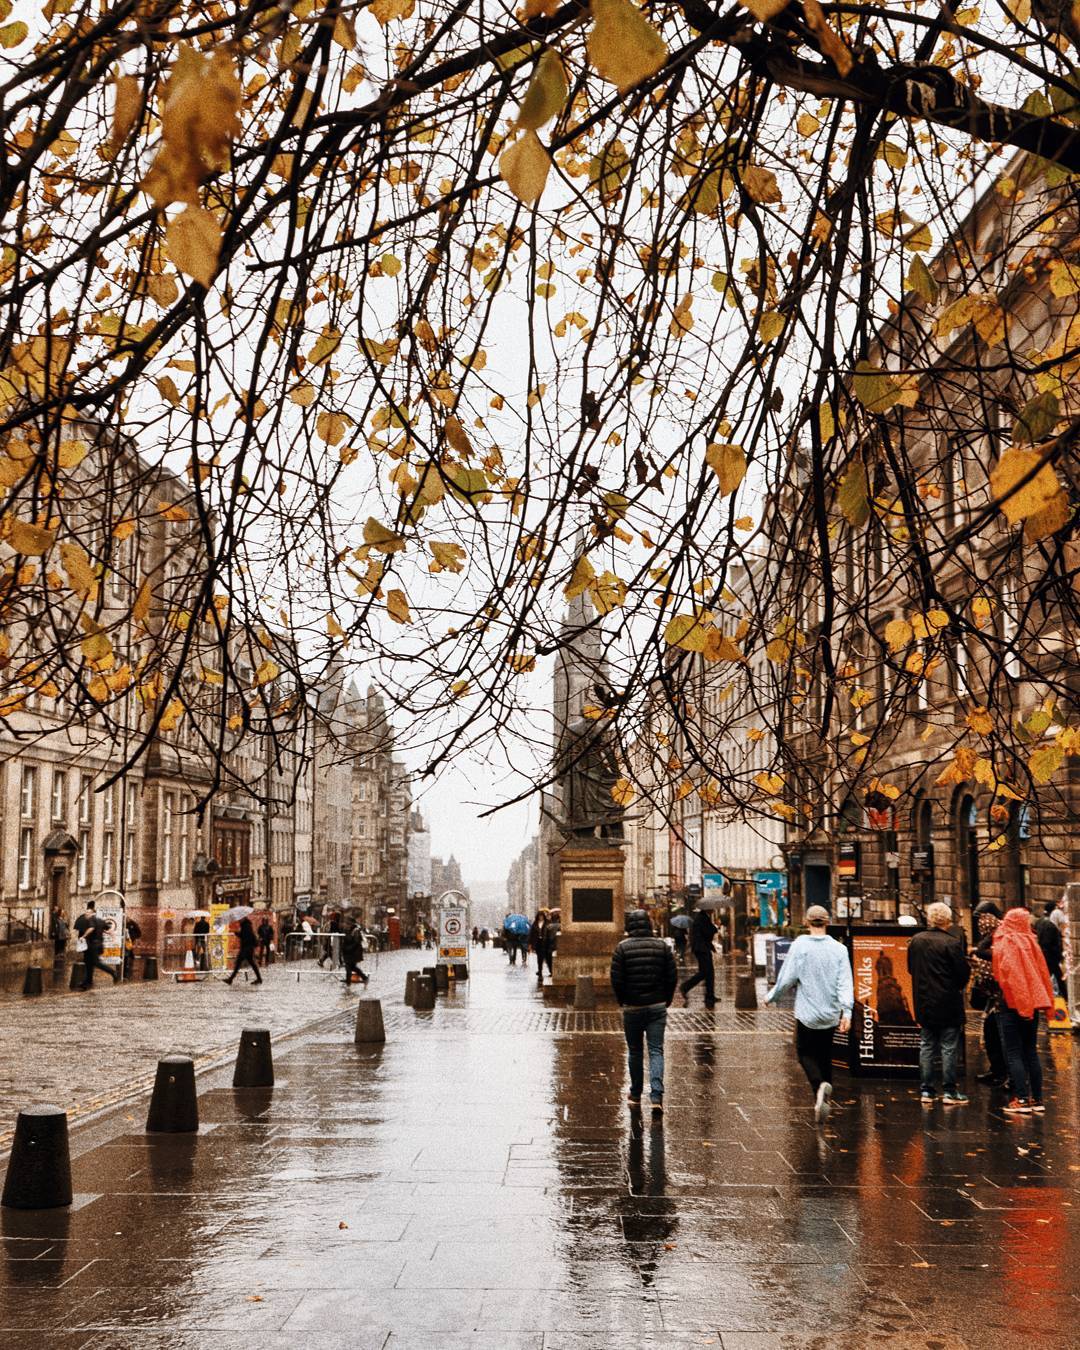 9 Photos That'll Make You Want To Spend Autumn in Edinburgh